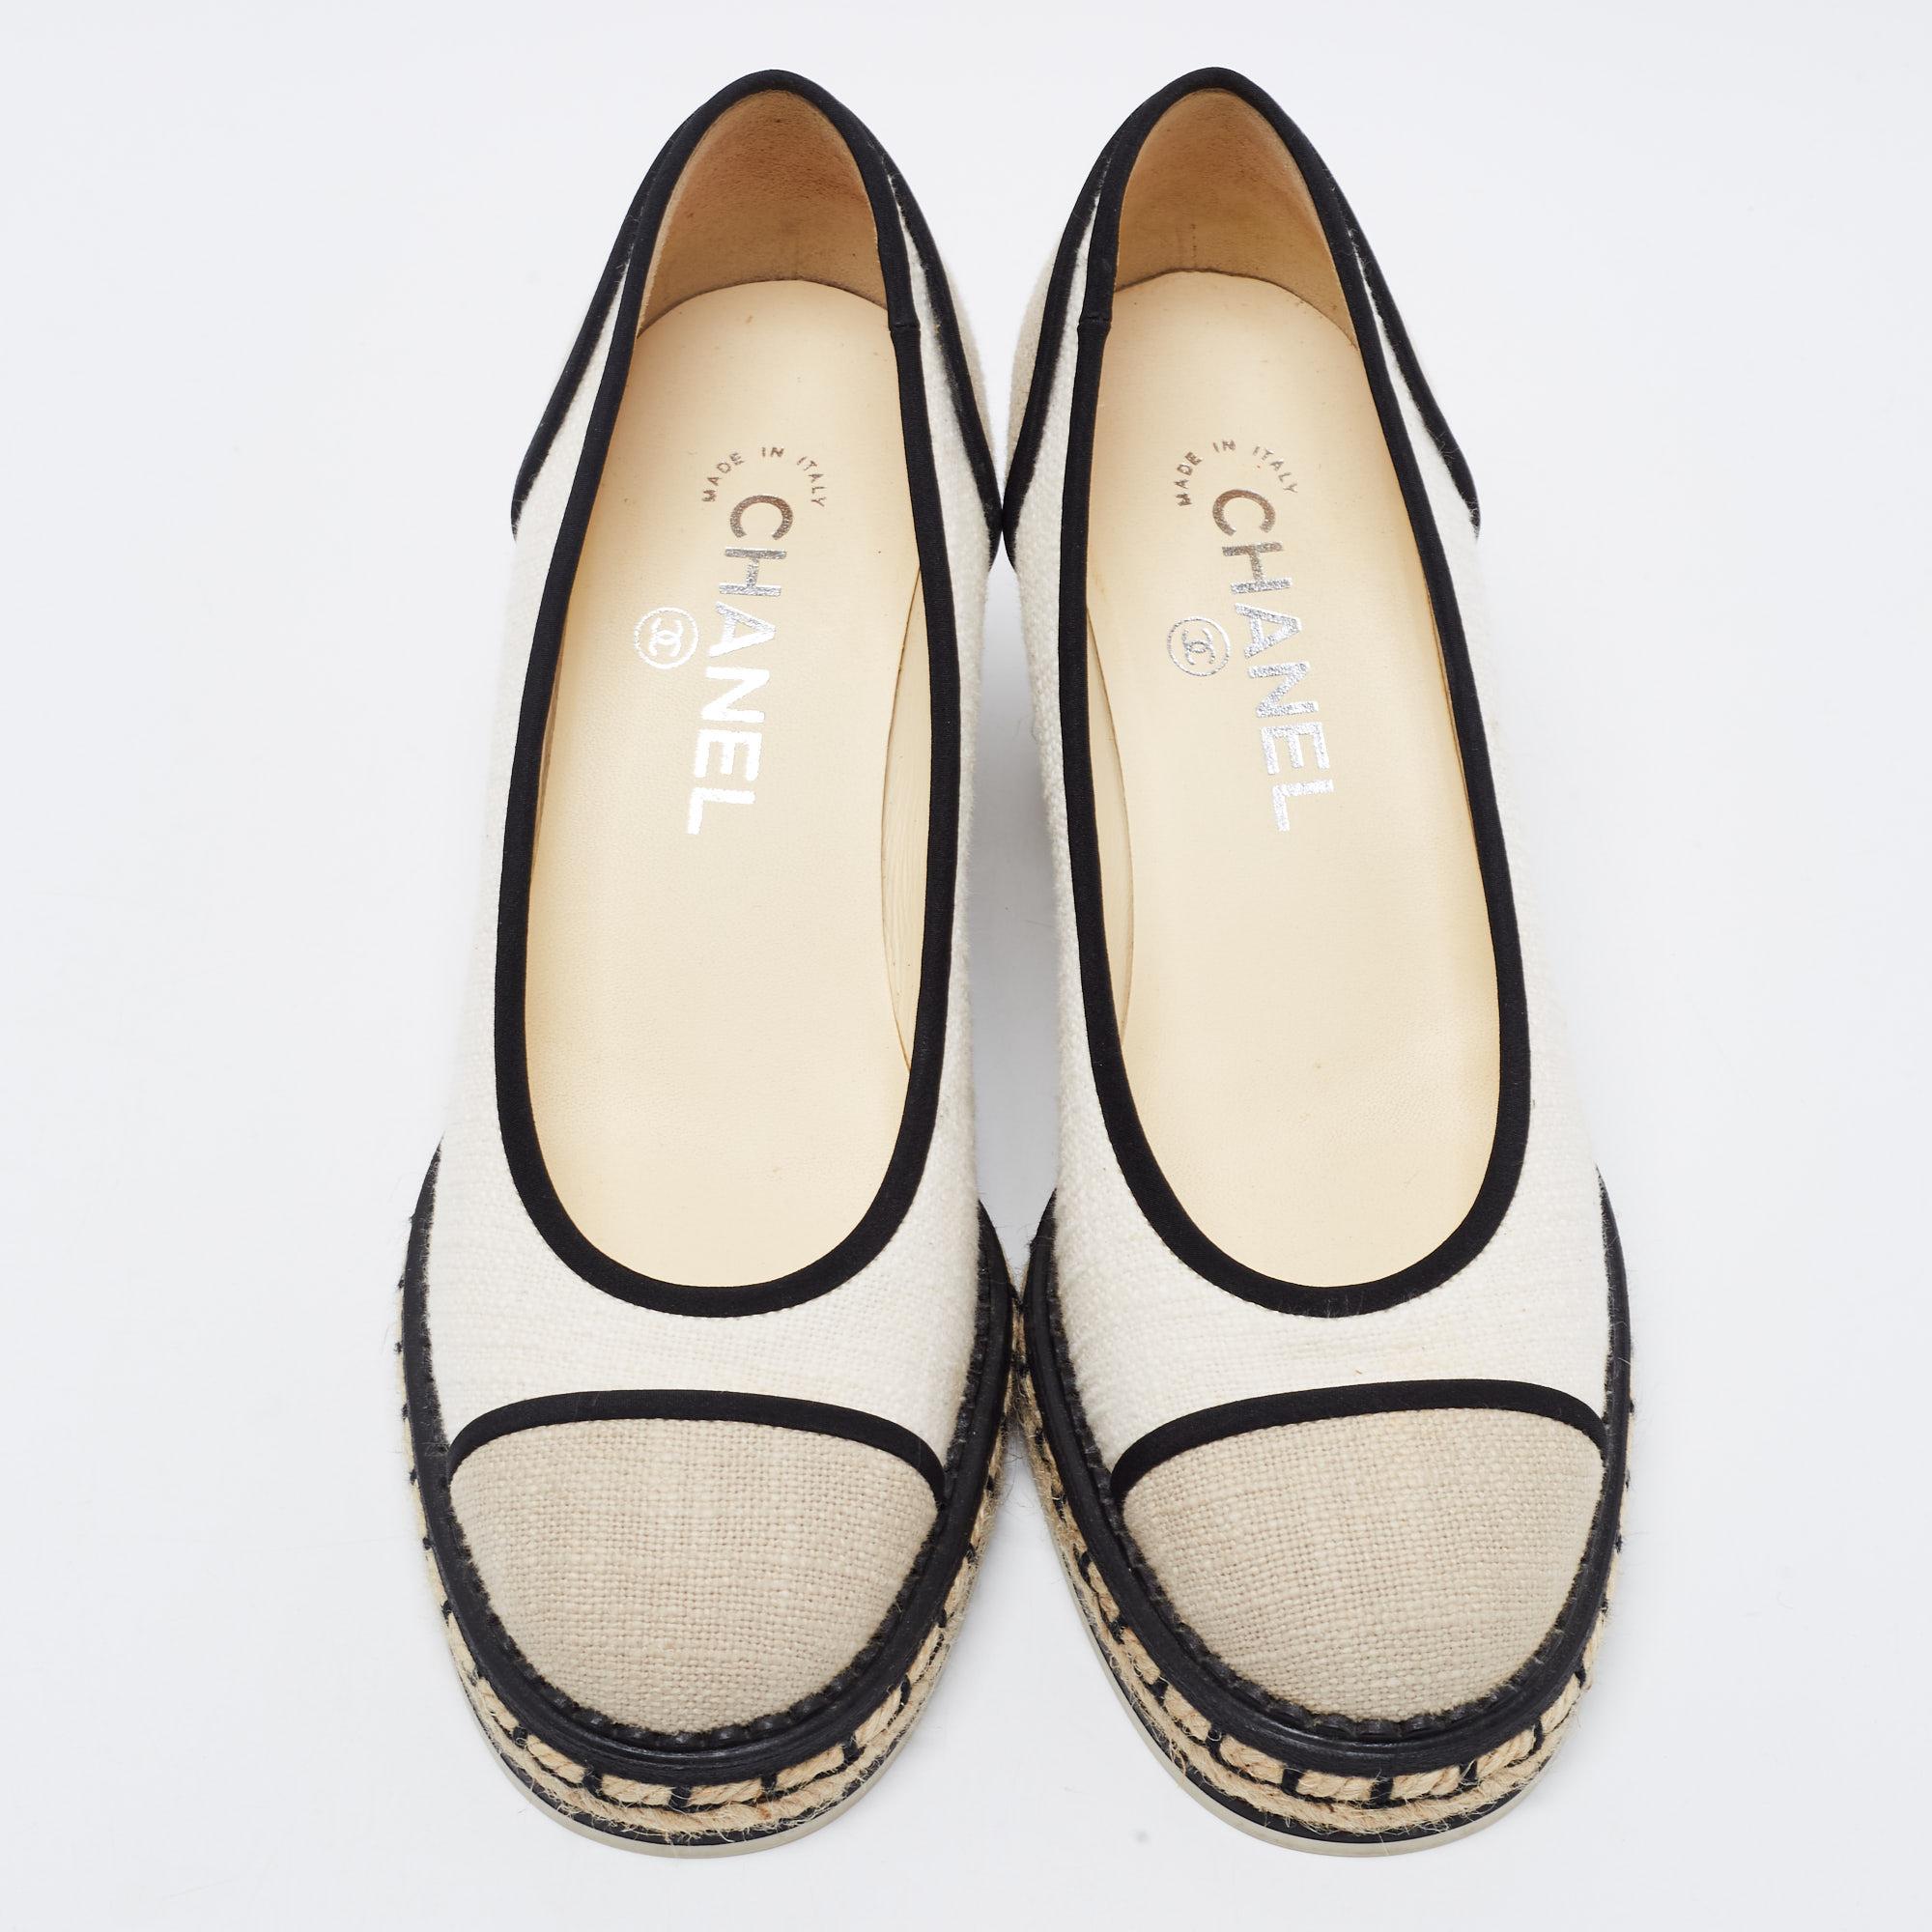 Complement your well-put-together outfit with these shoes by Chanel. Minimal and classy, they have an amazing construction for enduring quality and comfortable fit.

Includes: Original Dustbag

